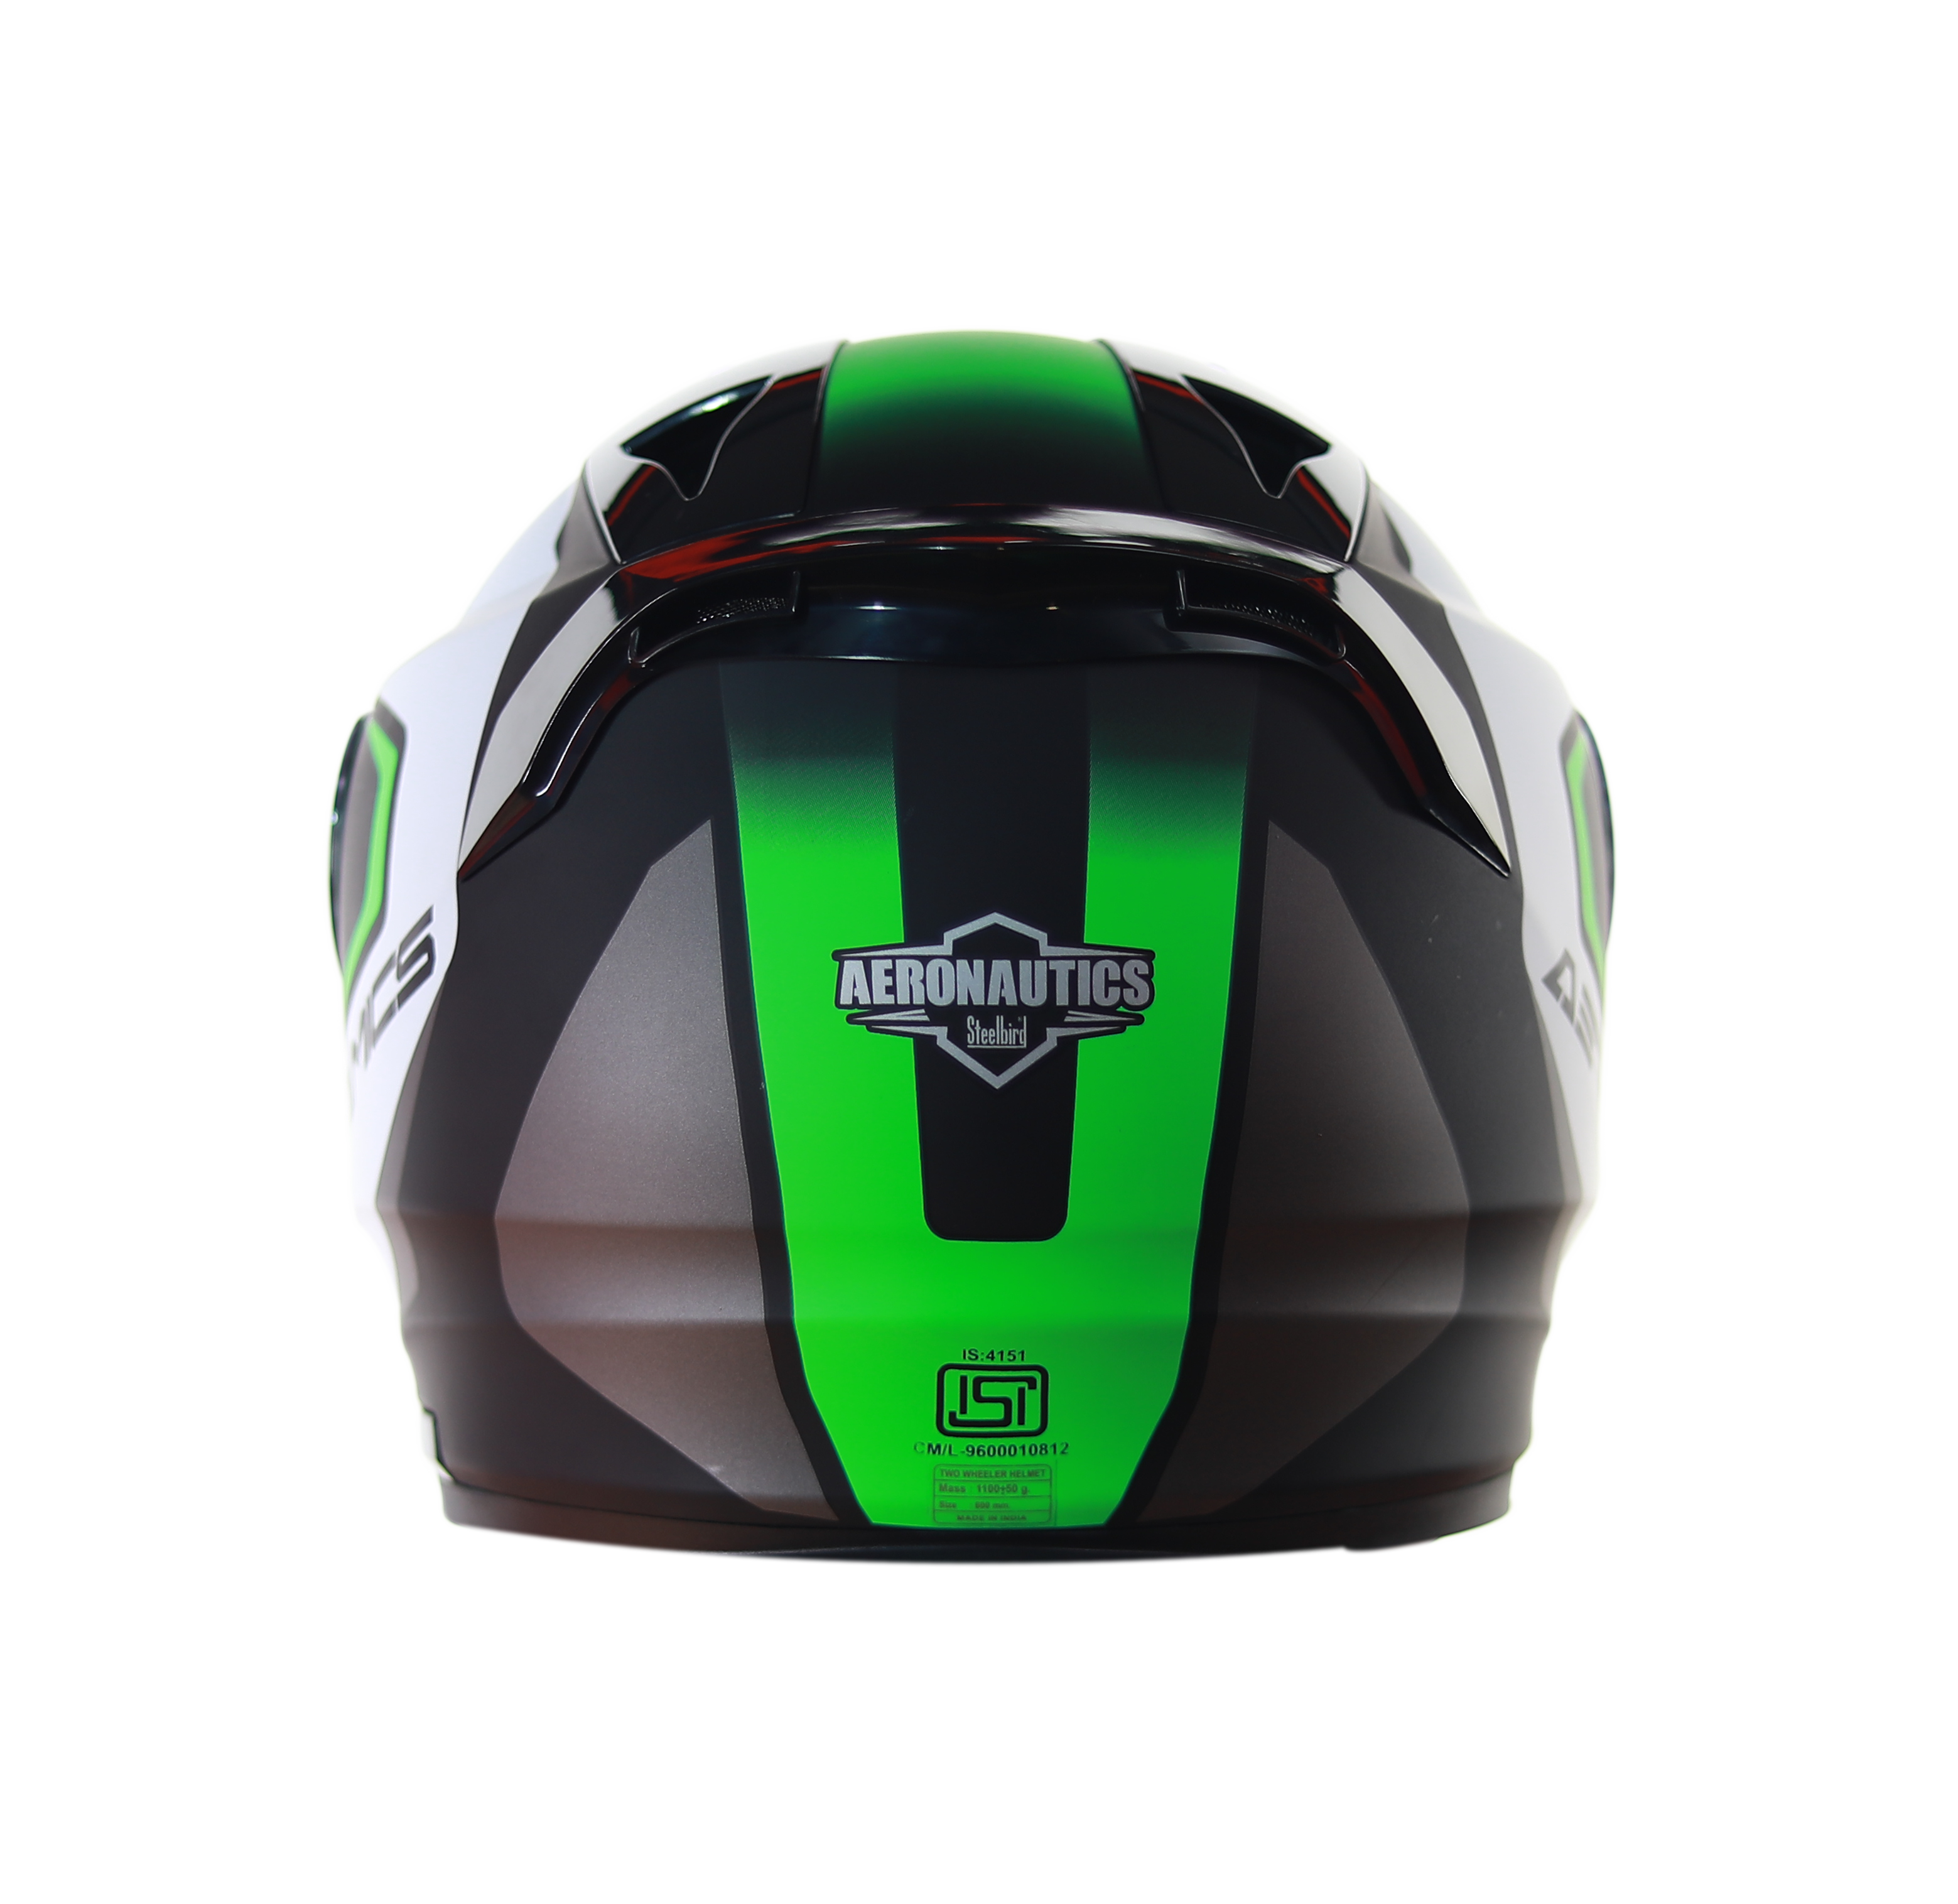 SA-1 Aerodynamics Mat Black With Green (Fitted With Clear Visor Extra Blue Chrome Visor Free)